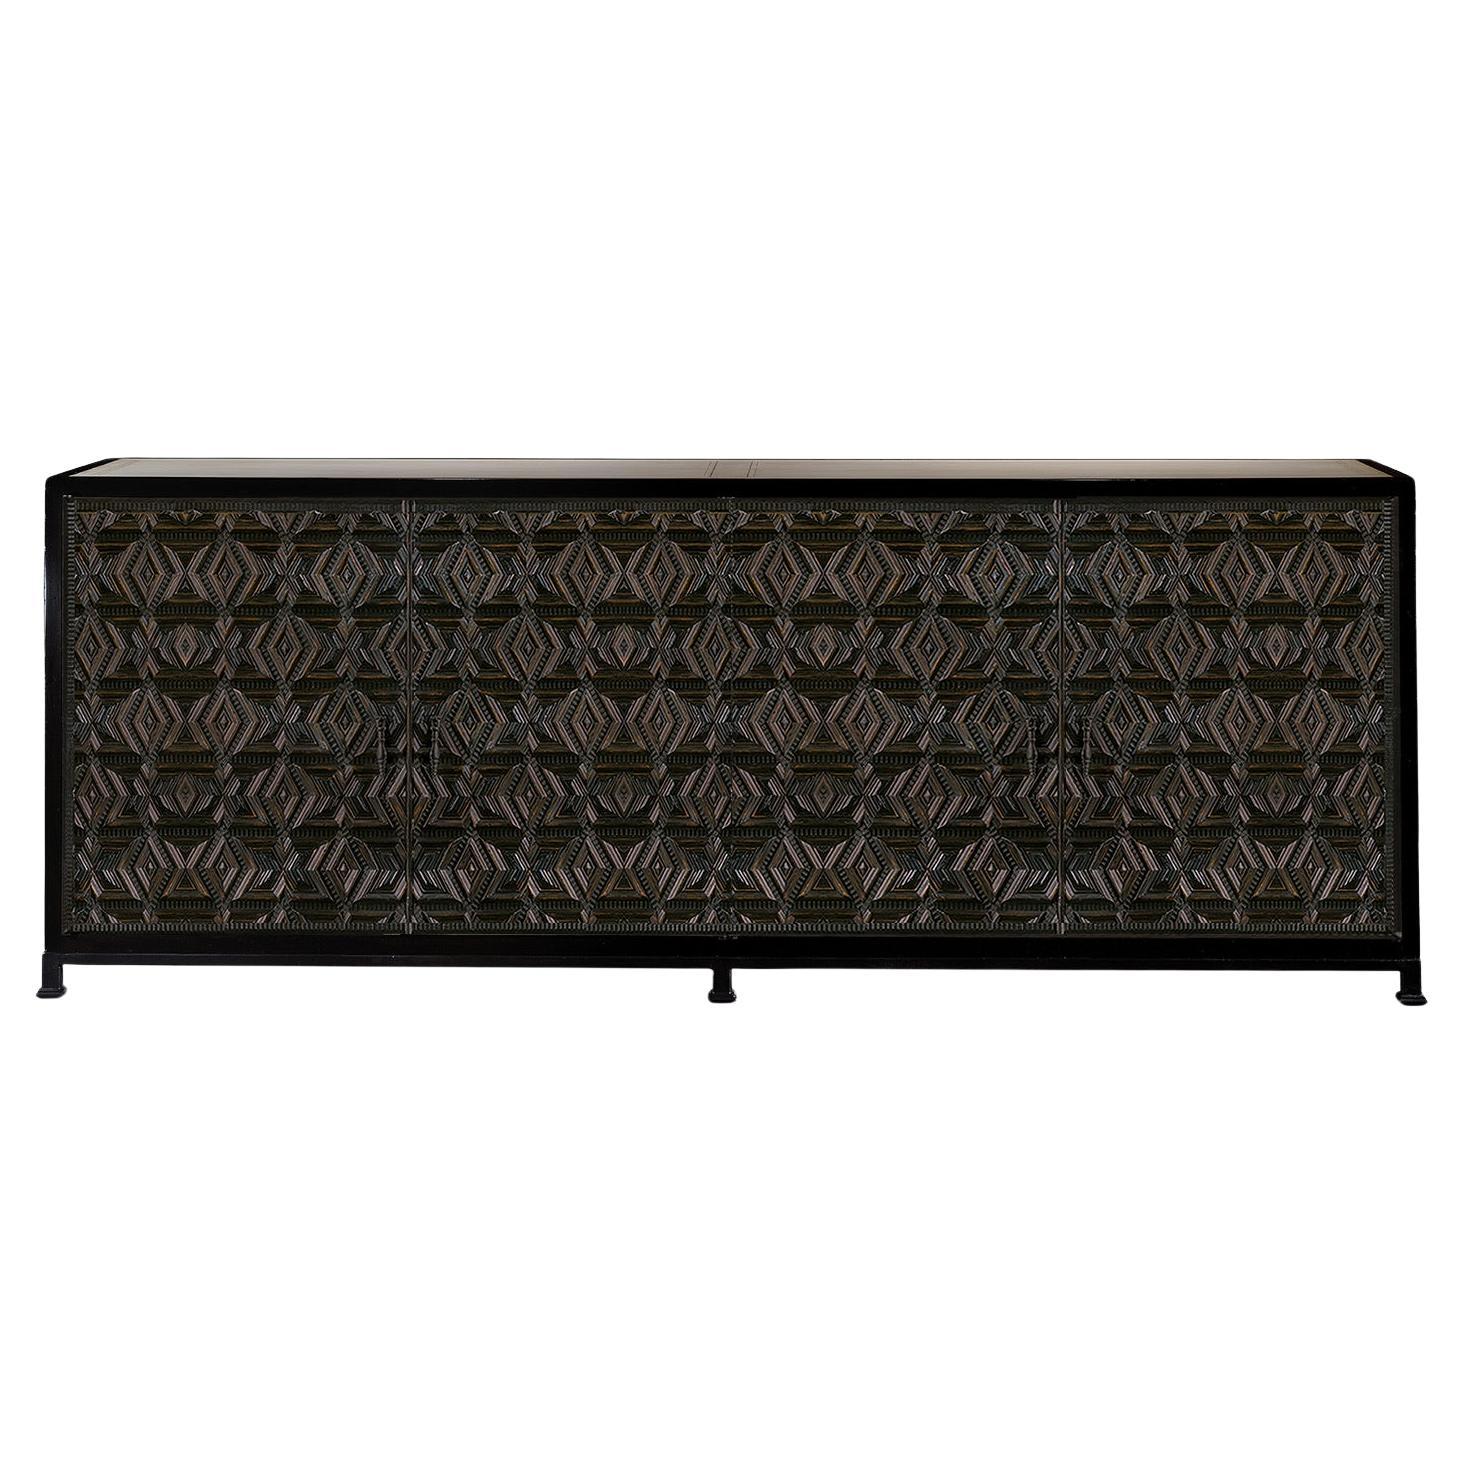 Queretano Buffet, a Statement Piece with Intricate Wood Decoration and Iron base For Sale